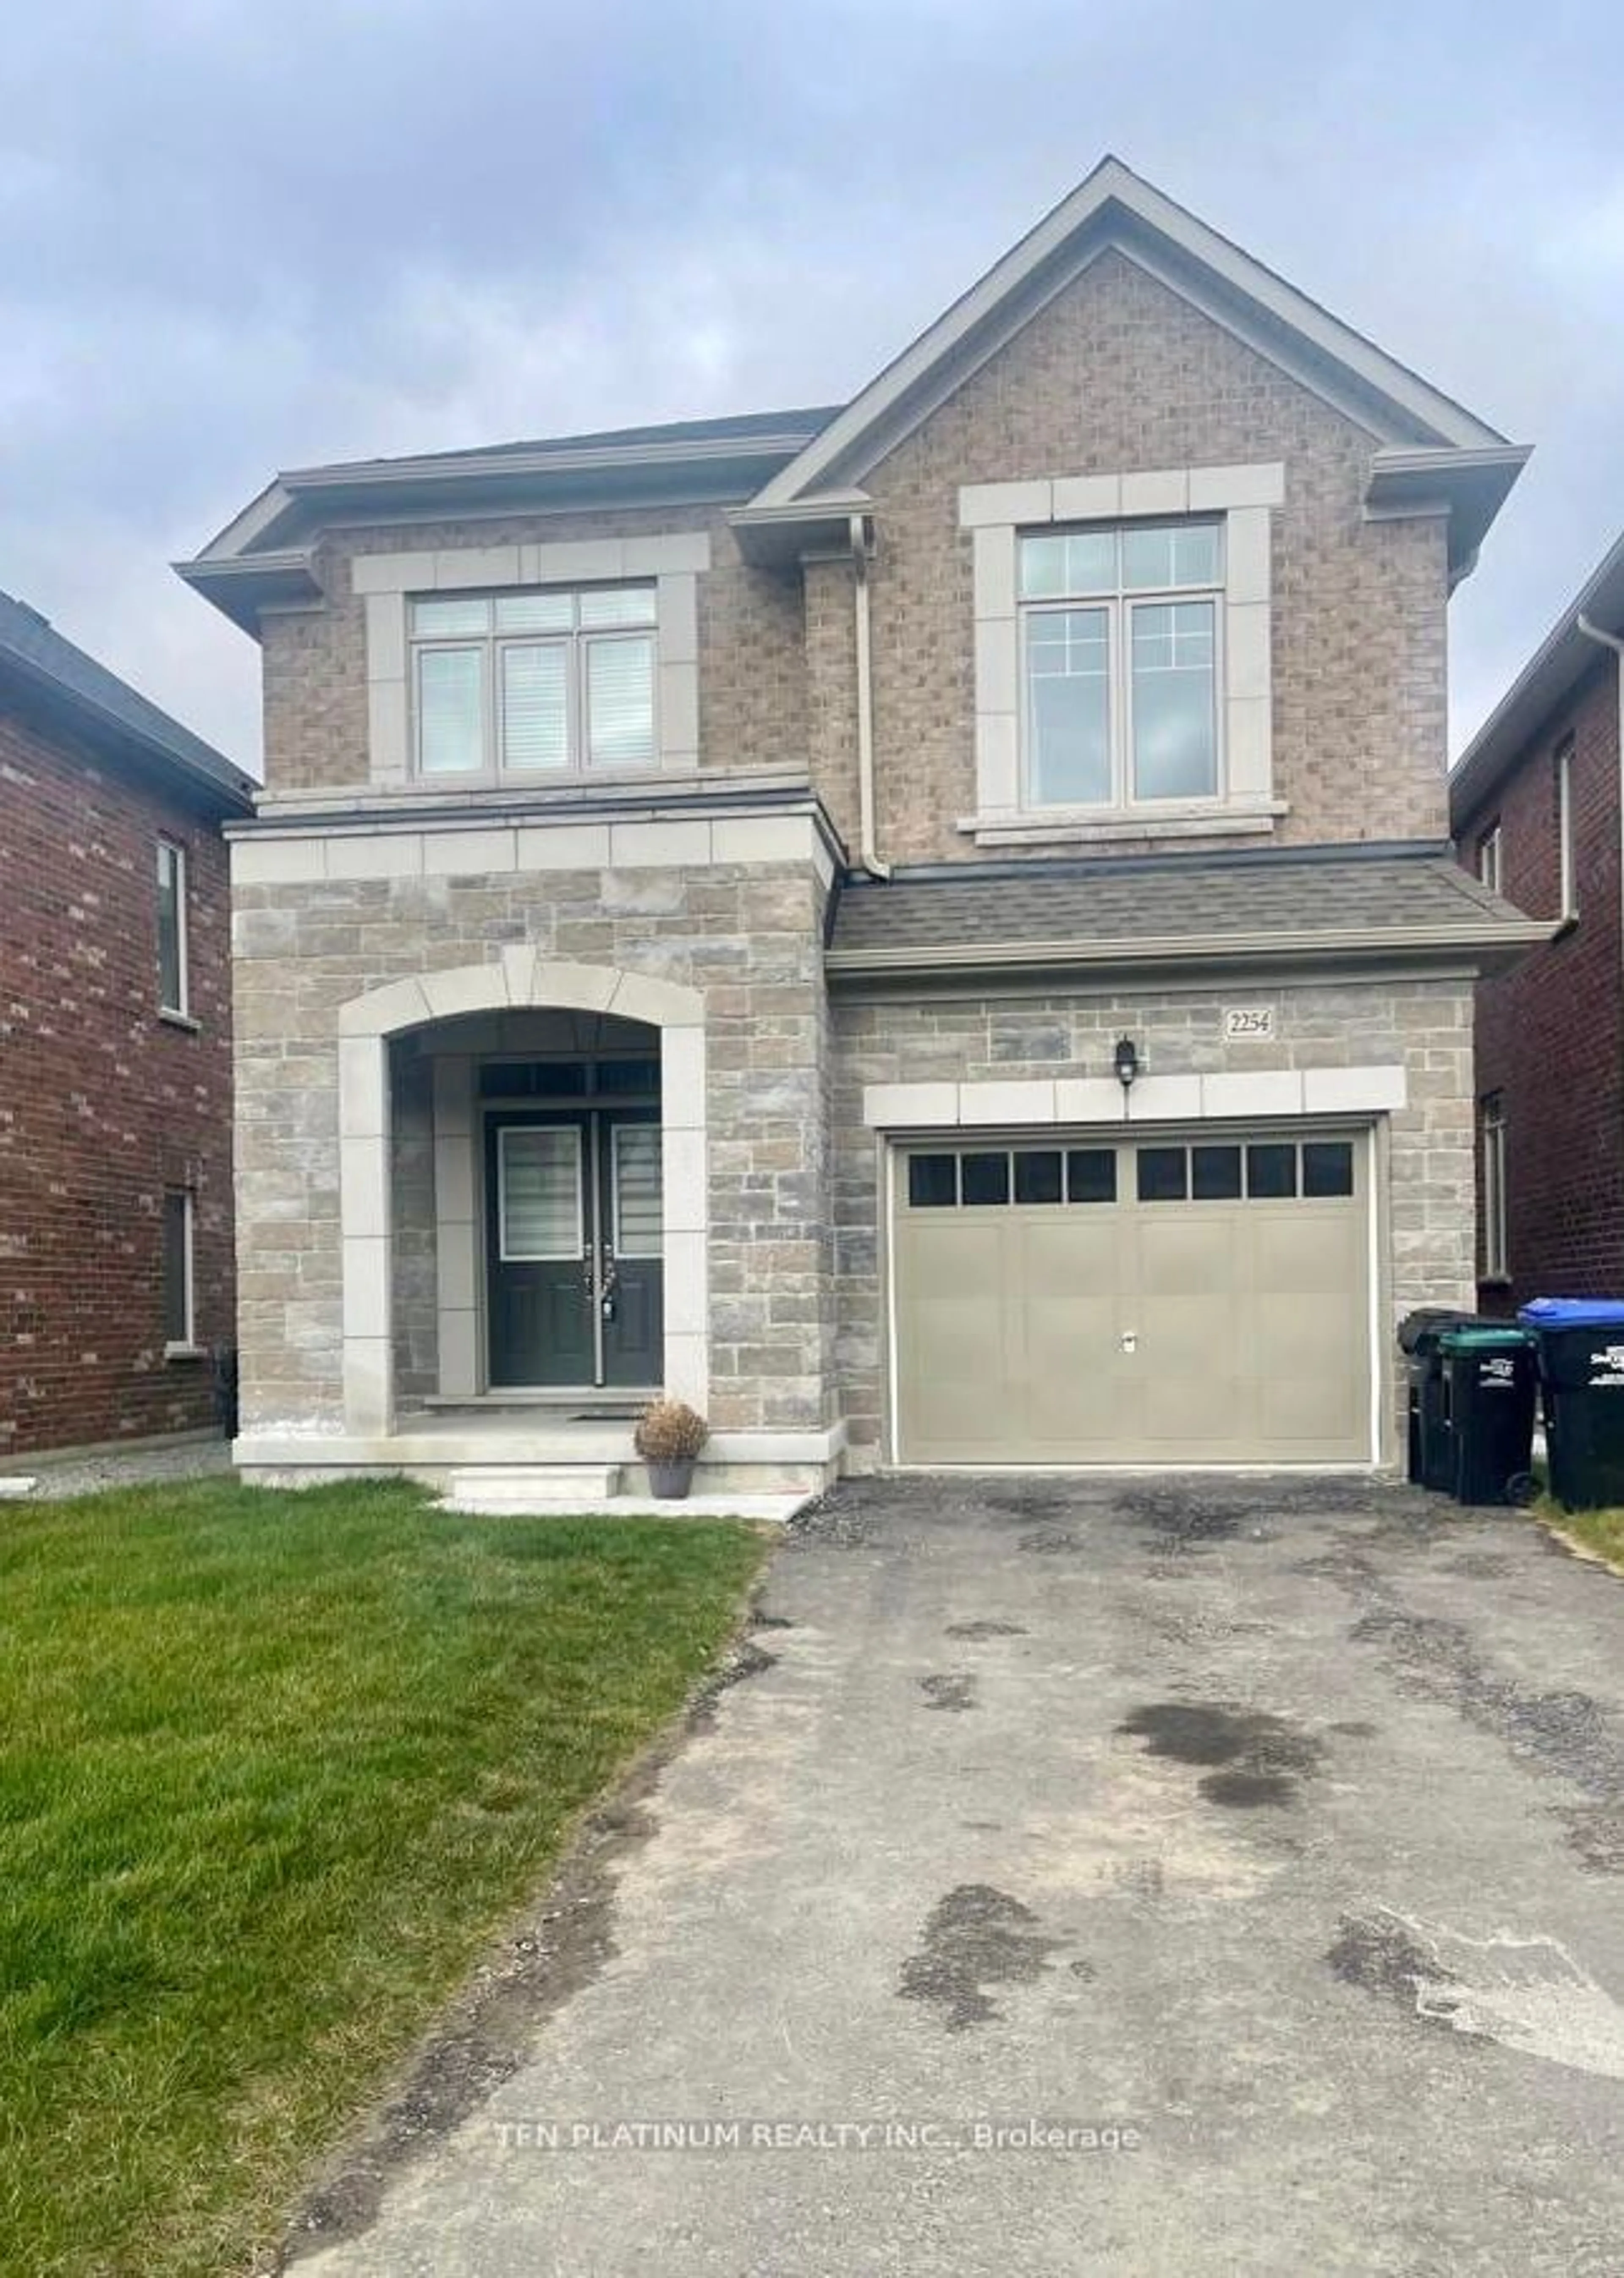 Home with brick exterior material for 2254 Grainger Lp, Innisfil Ontario L9S 0N1